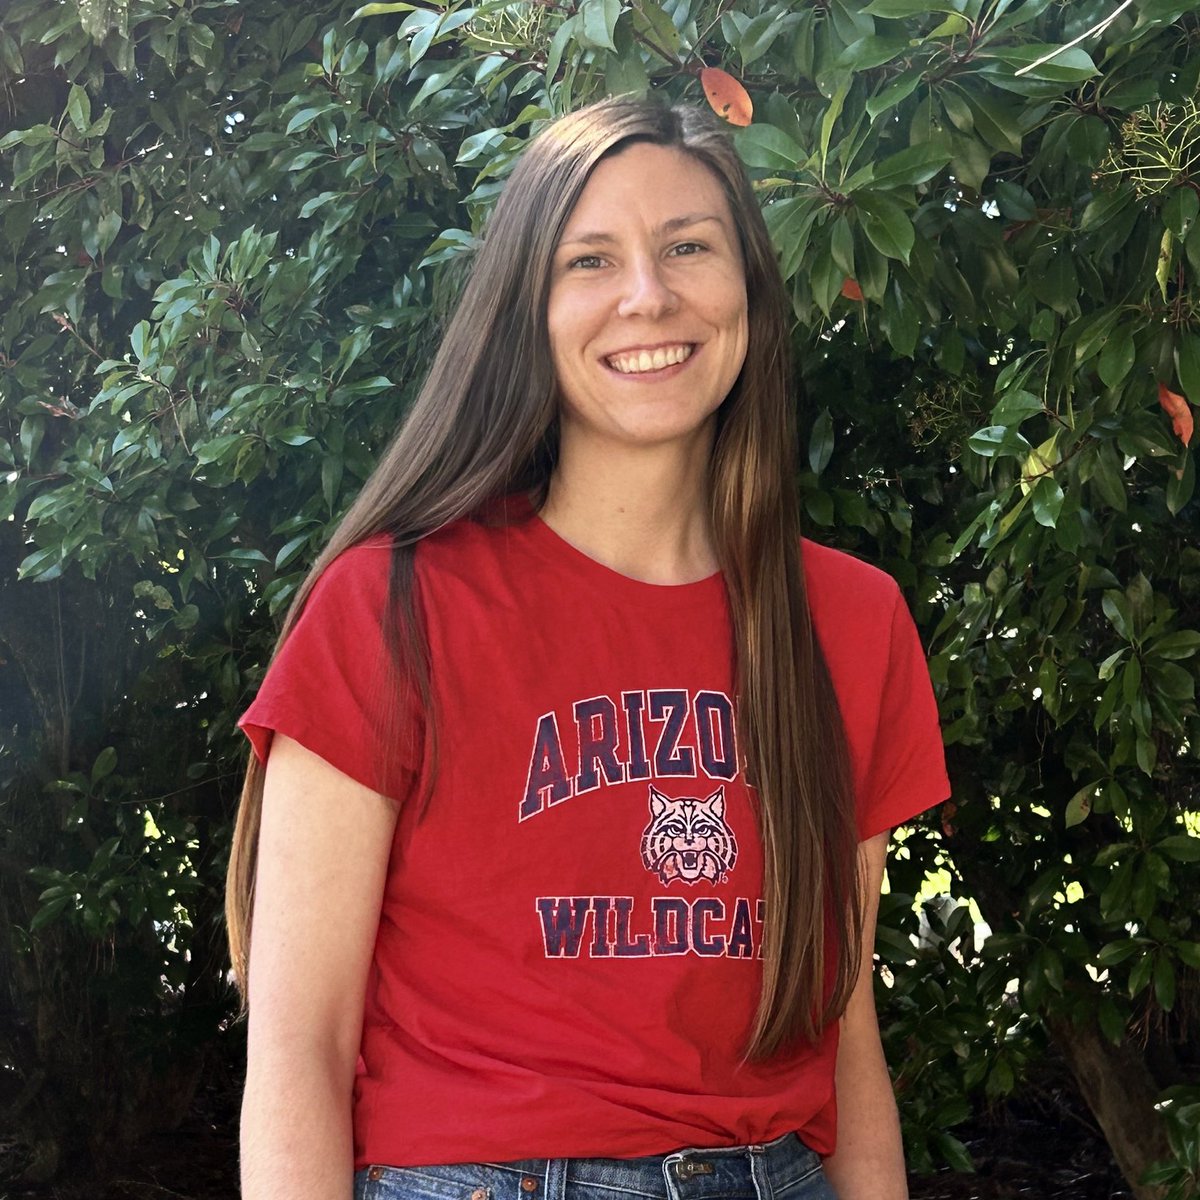 I am absolutely thrilled to announce that I’ll be joining the Dept of Psychology at @uarizona this fall to start my new lab! My lab will be using neuroimaging to examine affective and cognitive mechanisms in the context of traumatic and socioenvironmental stress. 🧠